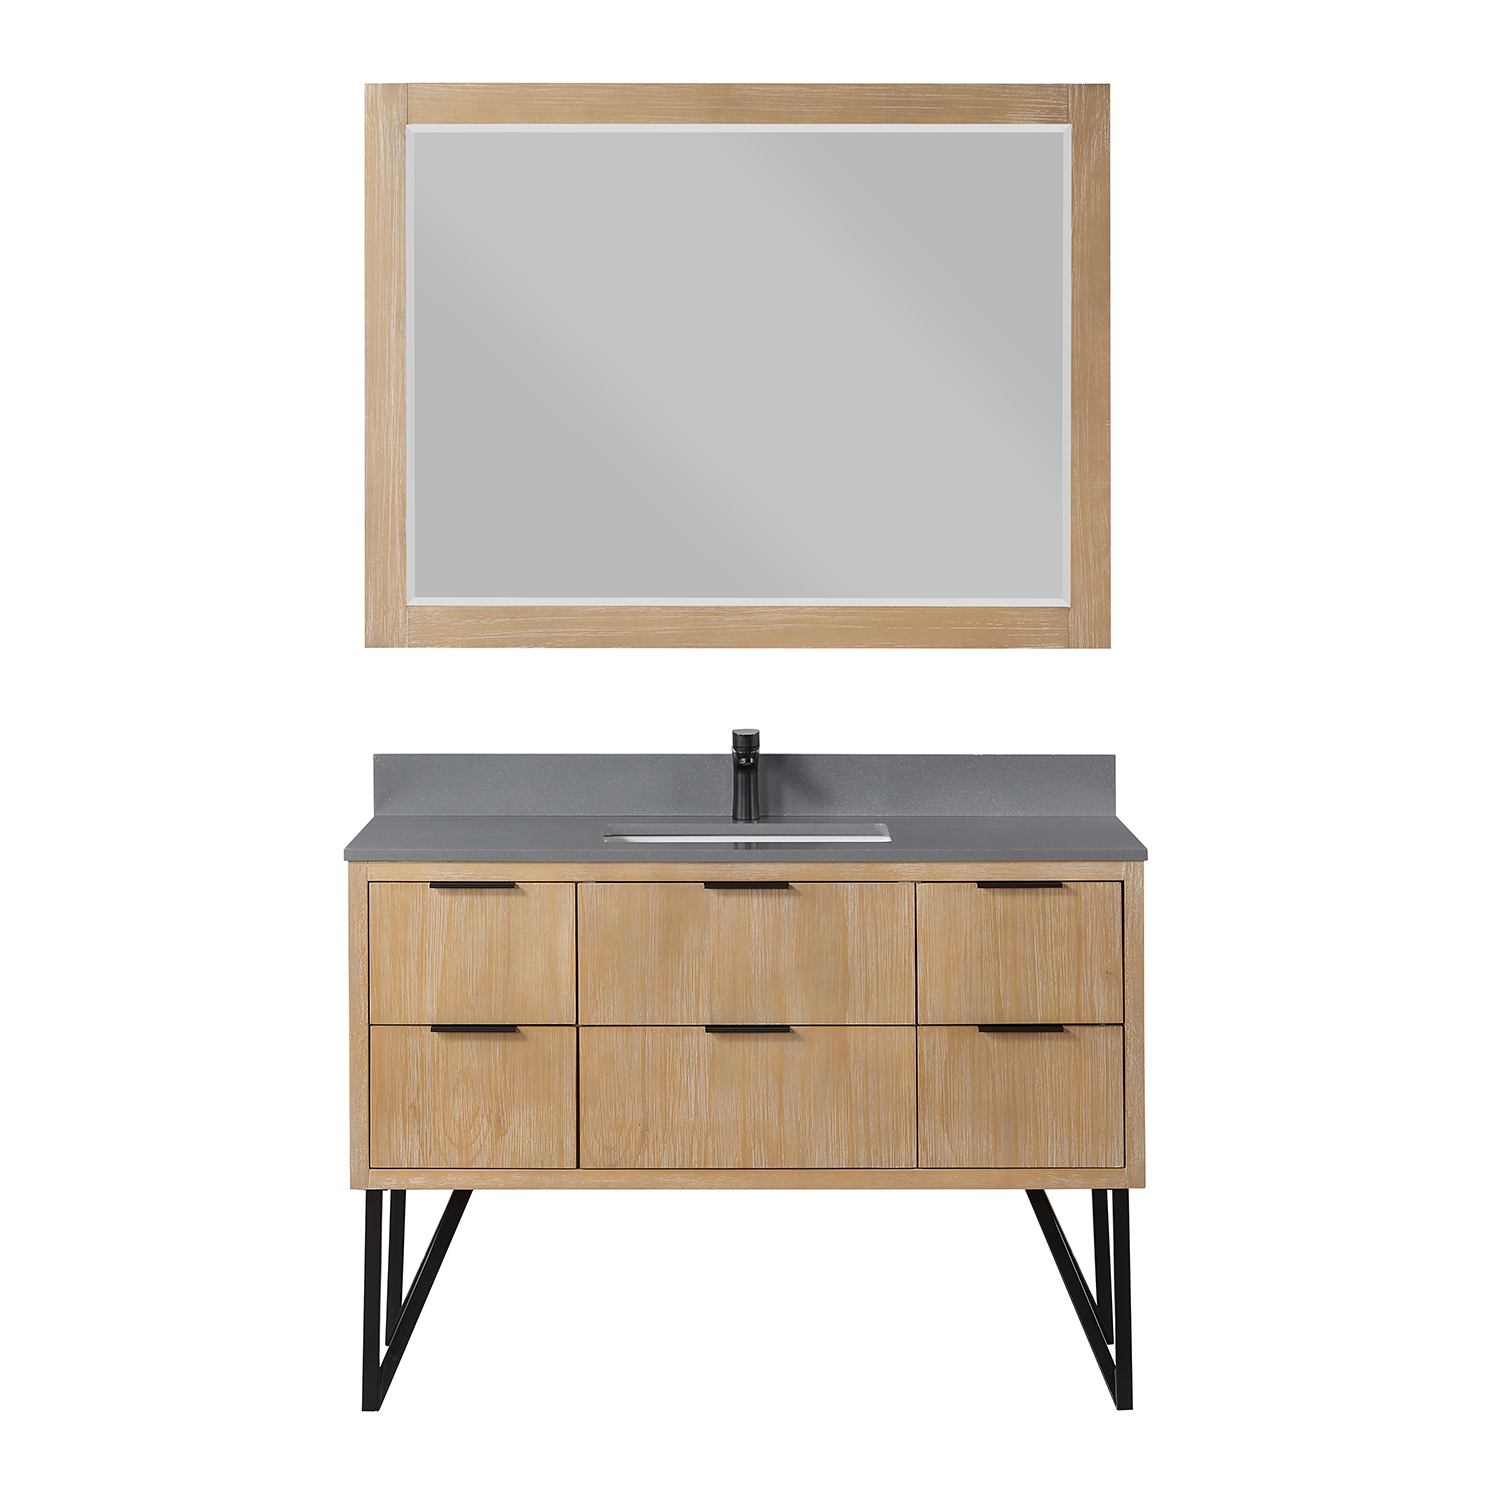 Issac Edwards Collection 48" Single Bathroom Vanity in Weathered Pine with Carrara White Composite Stone Countertop without Mirror